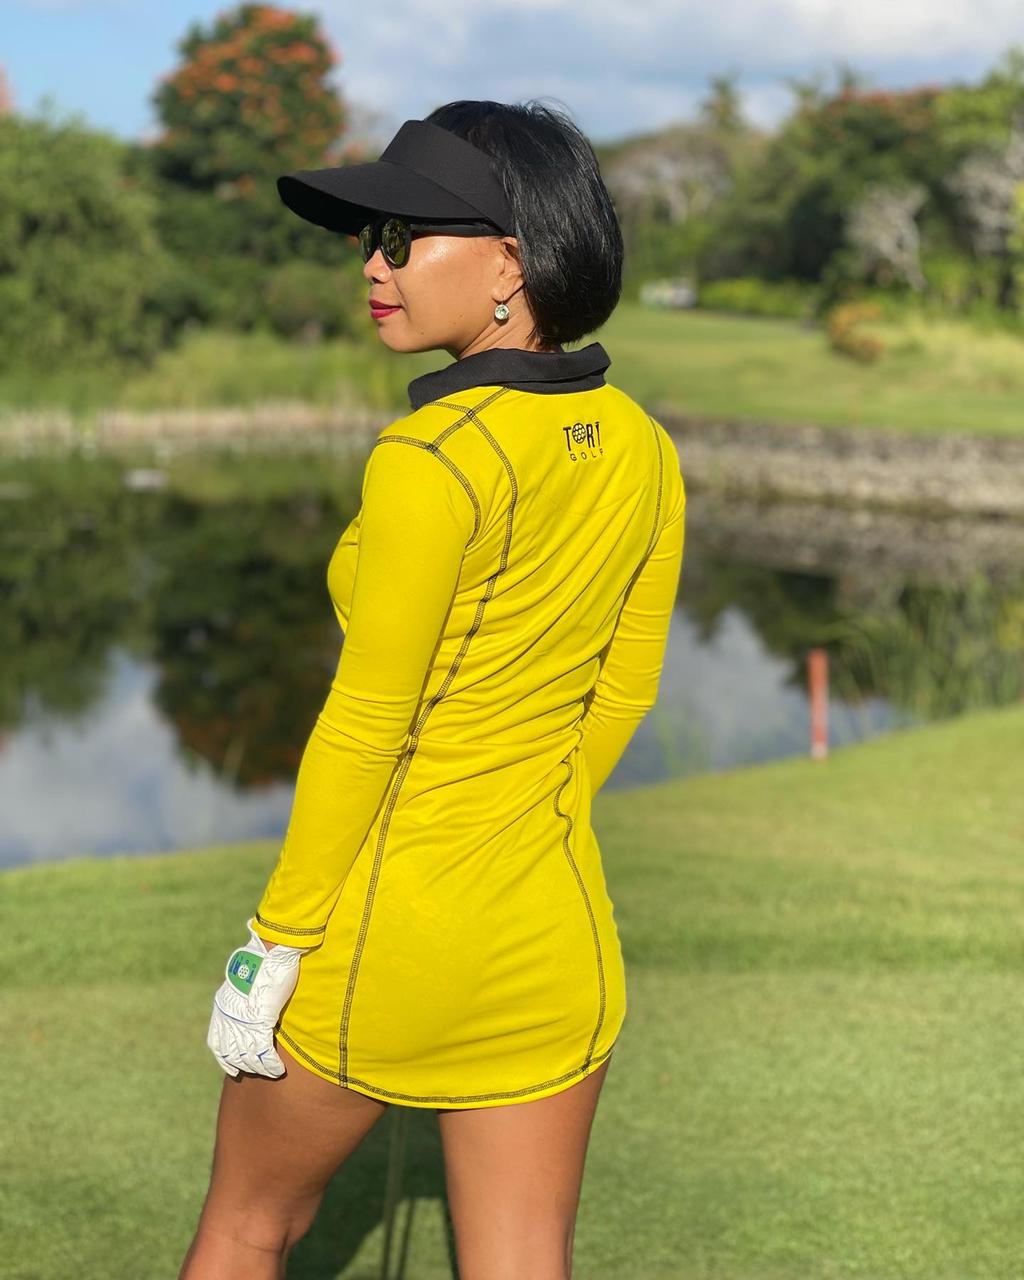 GD-012B || Golf Dress Bright Yellow with Black Trim and Black Overlocked Seams  LS  Mock Breast Pocket Trims with 2 Waist Pockets